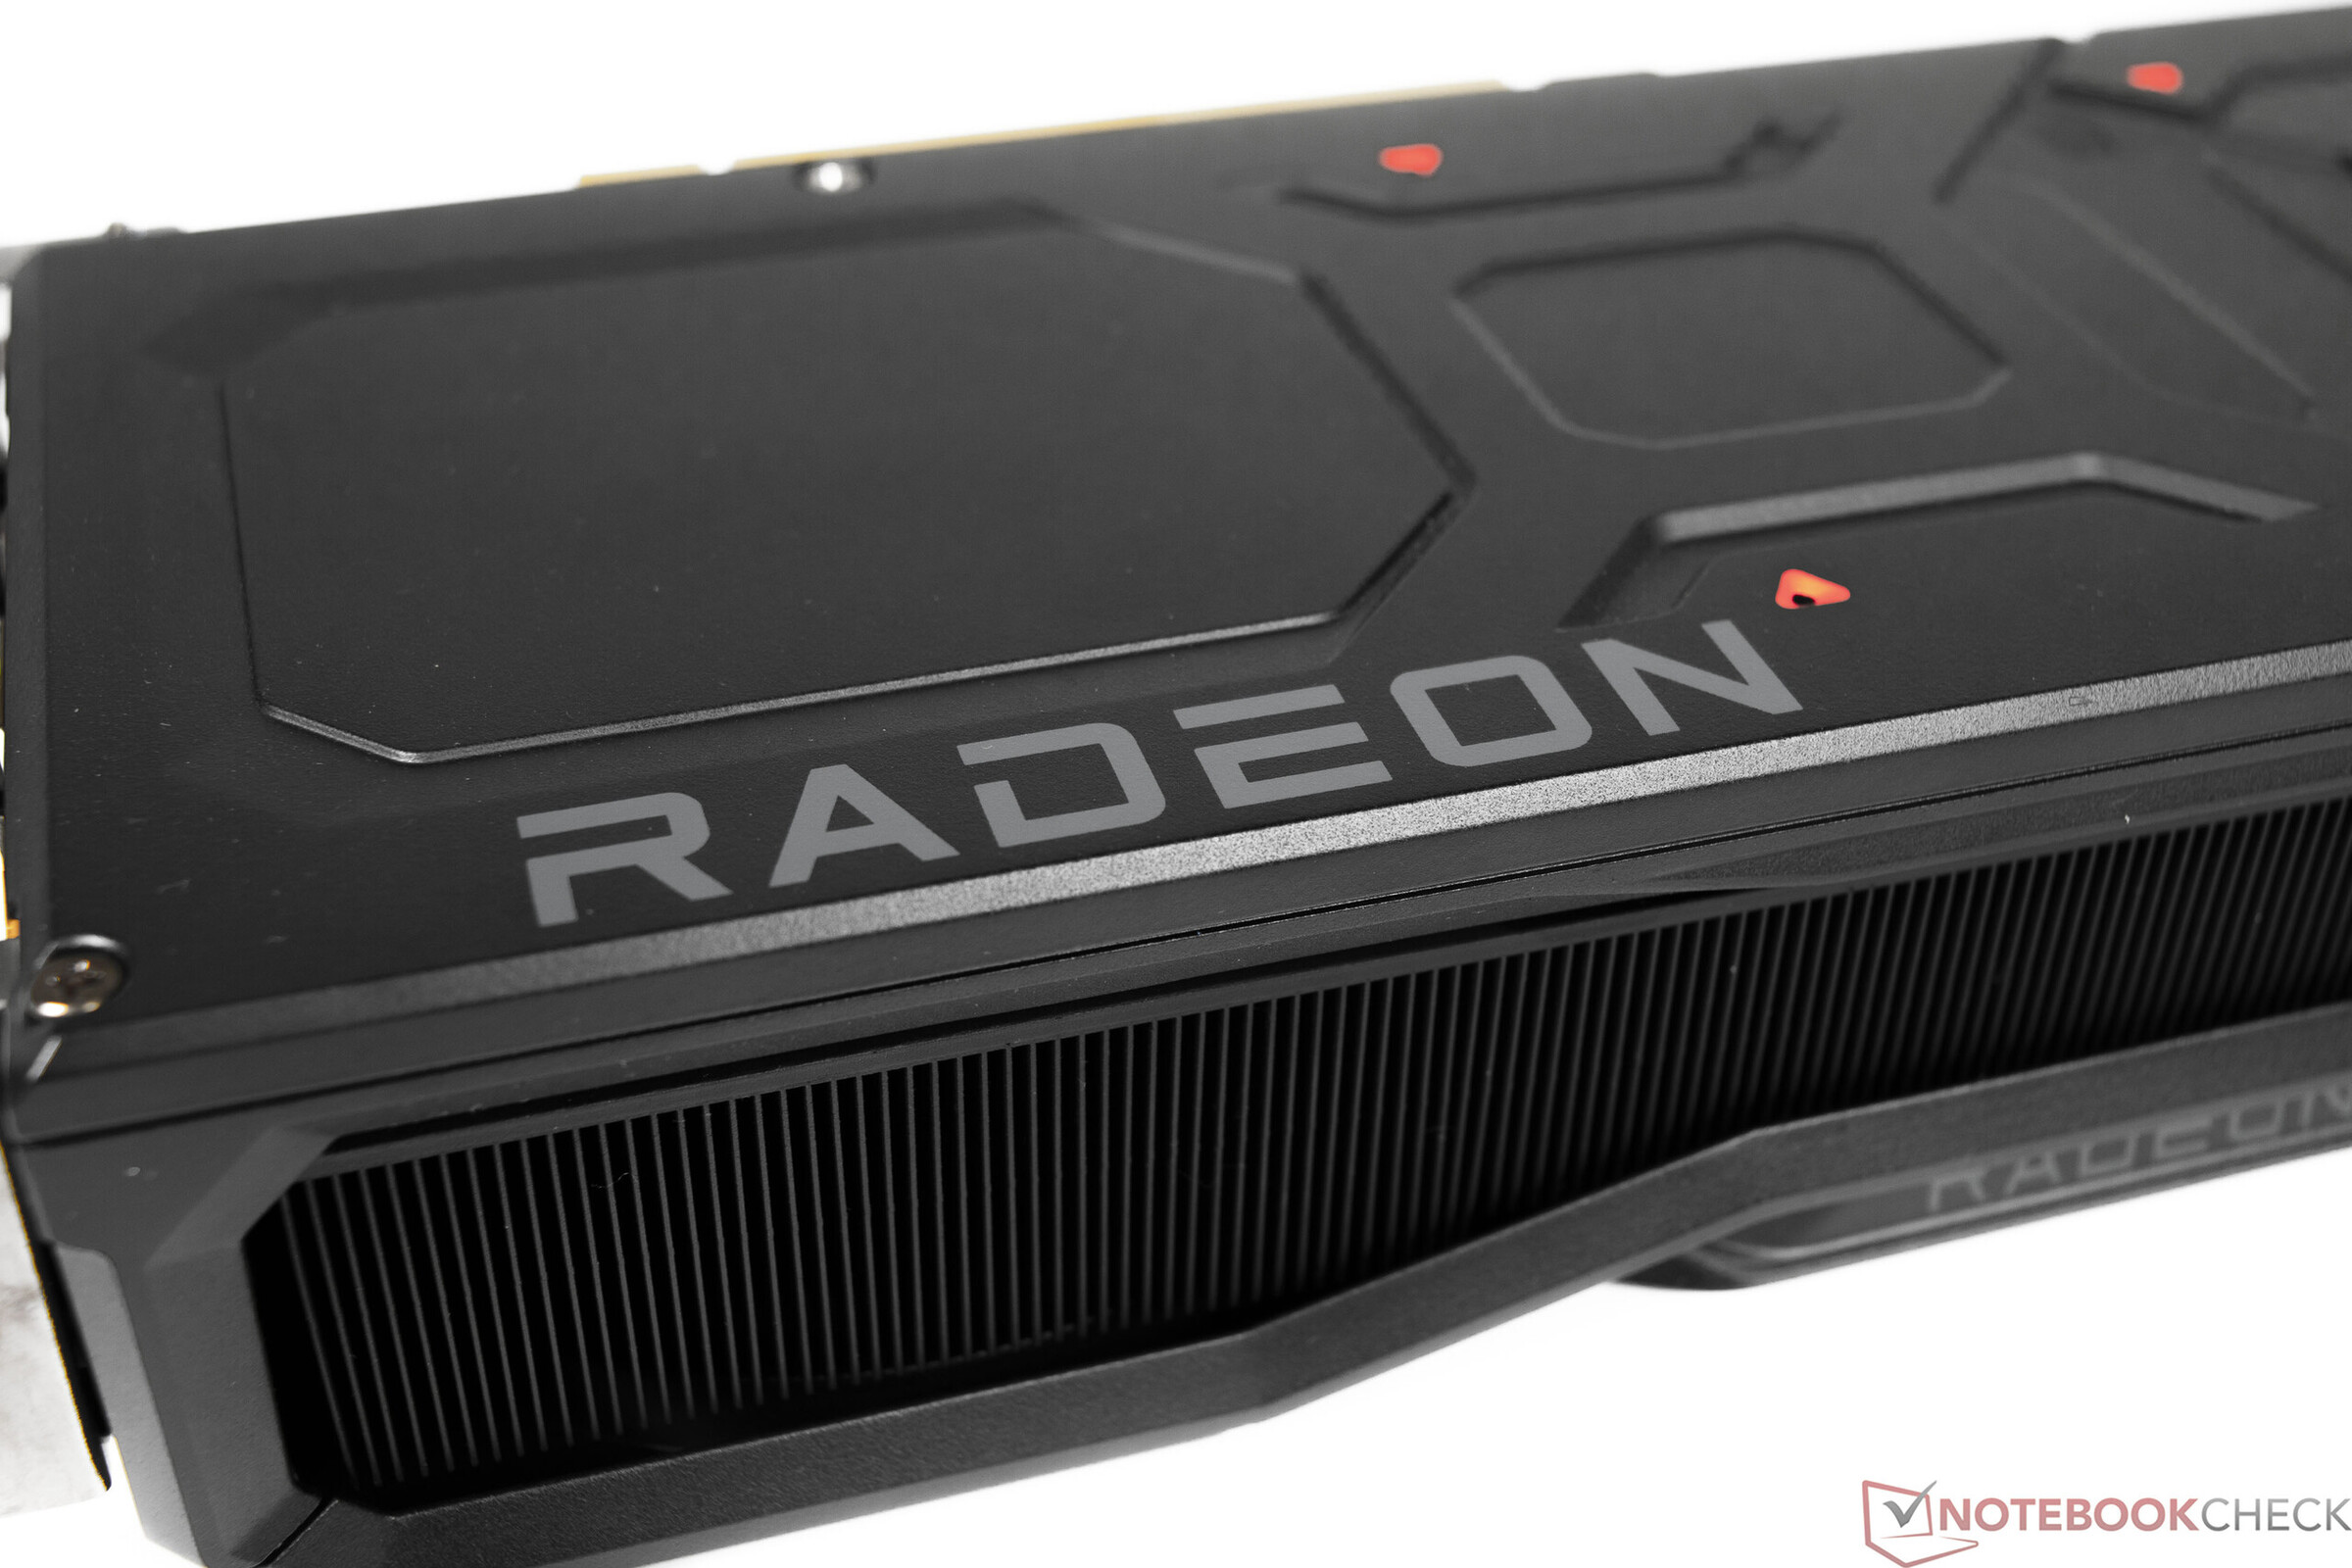 AMD Radeon RX 7600 XT is now rumored to launch on May 25